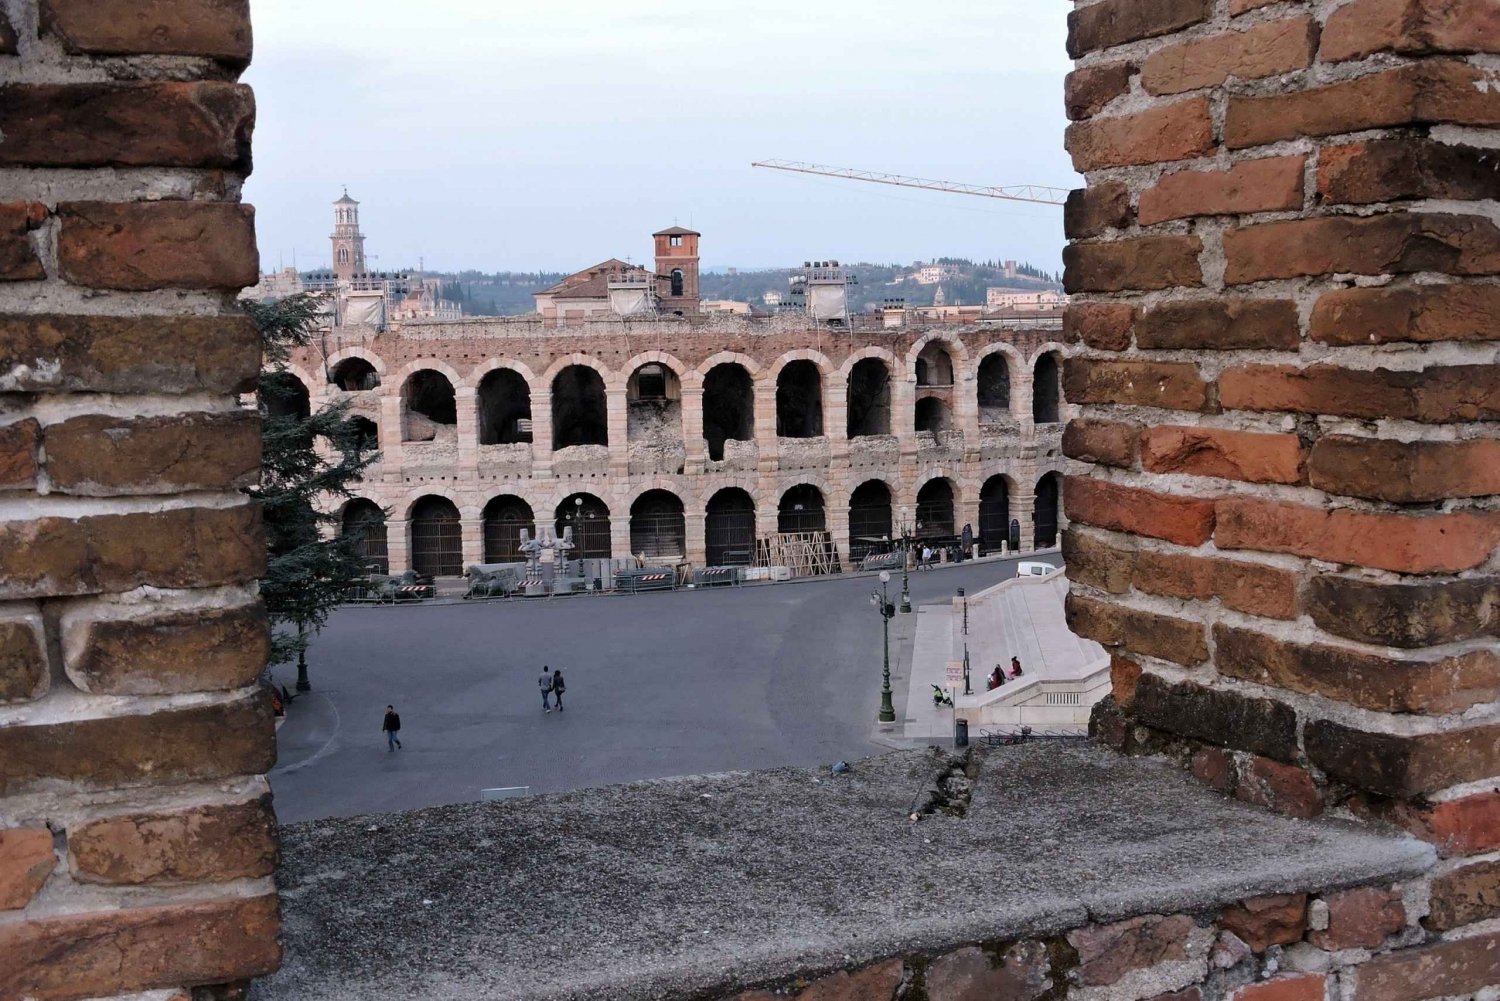 From Venice: Day Trip to Verona by Train with Guided Tour